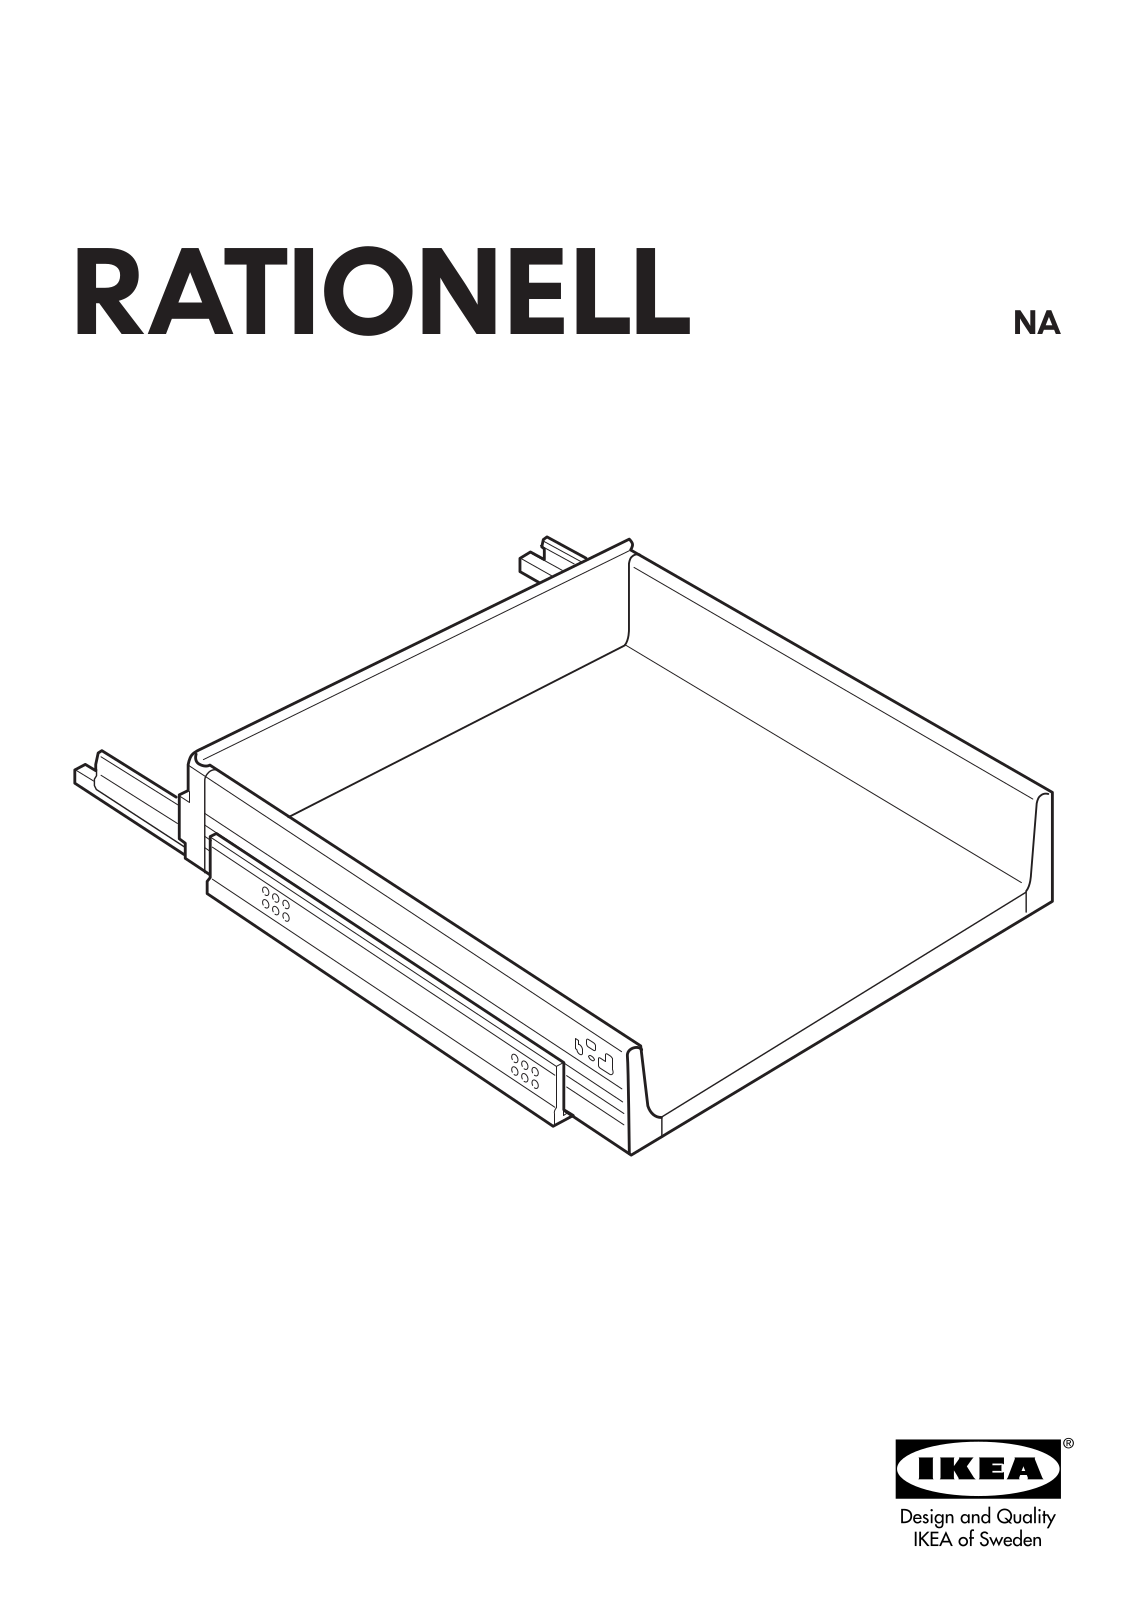 IKEA RATIONELL FULL EXTENDING DRAWER 24, RATIONELL FULL EXTENDING DRAWER 18 Assembly Instruction